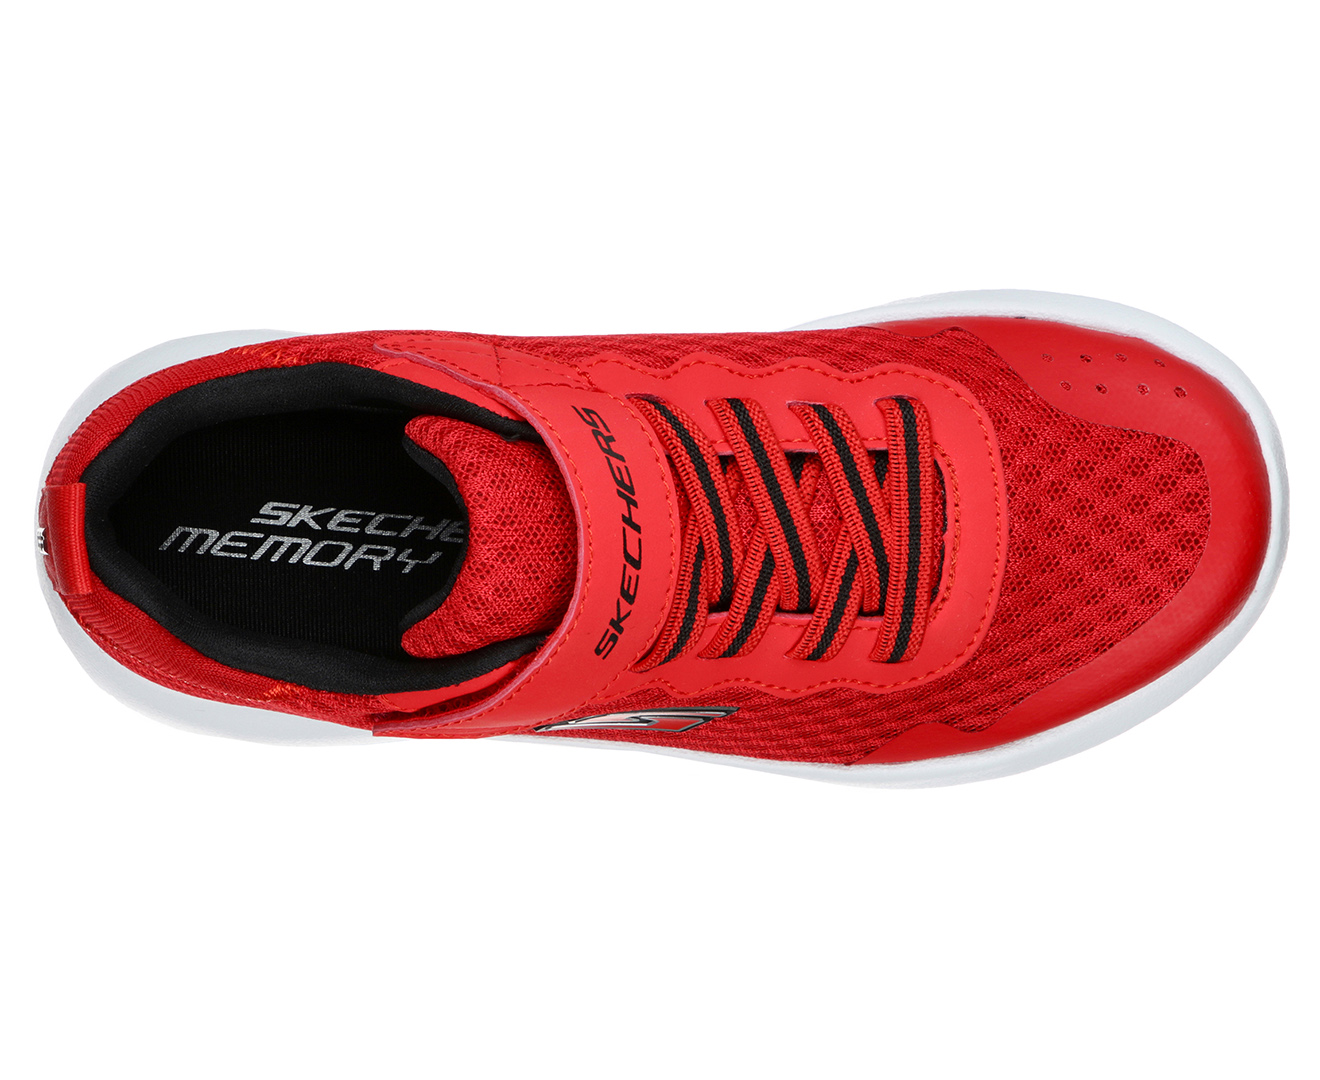 Skechers Boys' Dynamight Hyper Torque Sports Training Shoes - Red/Black ...